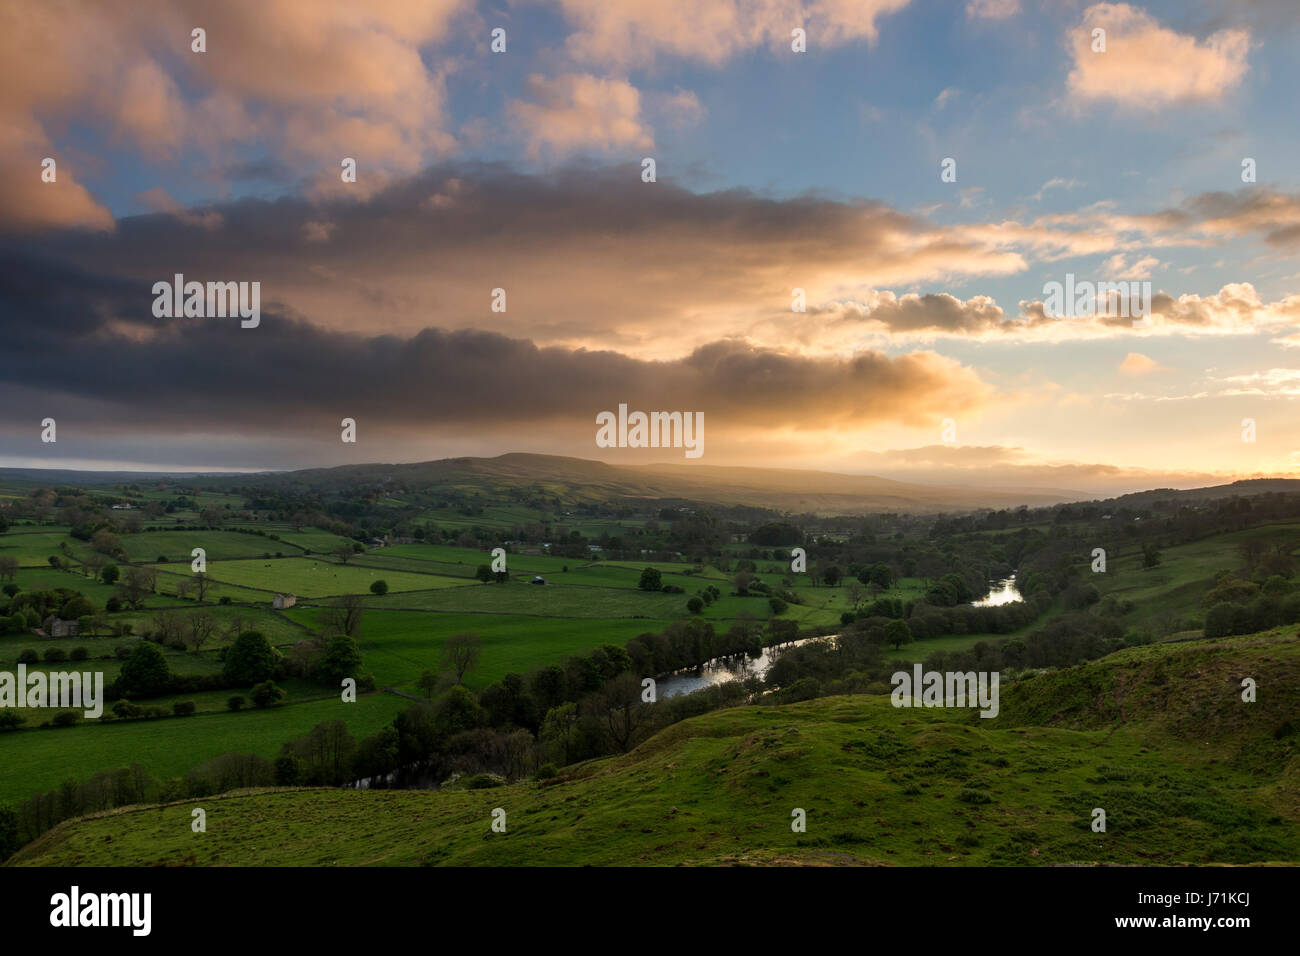 Whistle Crag, Middleton-in-Teesdale, County Durham. Monday 22nd May 2017.  UK Weather.  Golden light illuminates the River Tees in Upper Teesdale as the sun begins to set over the North Pennines in Northeast England.  © David Forster/Alamy Live News. Stock Photo